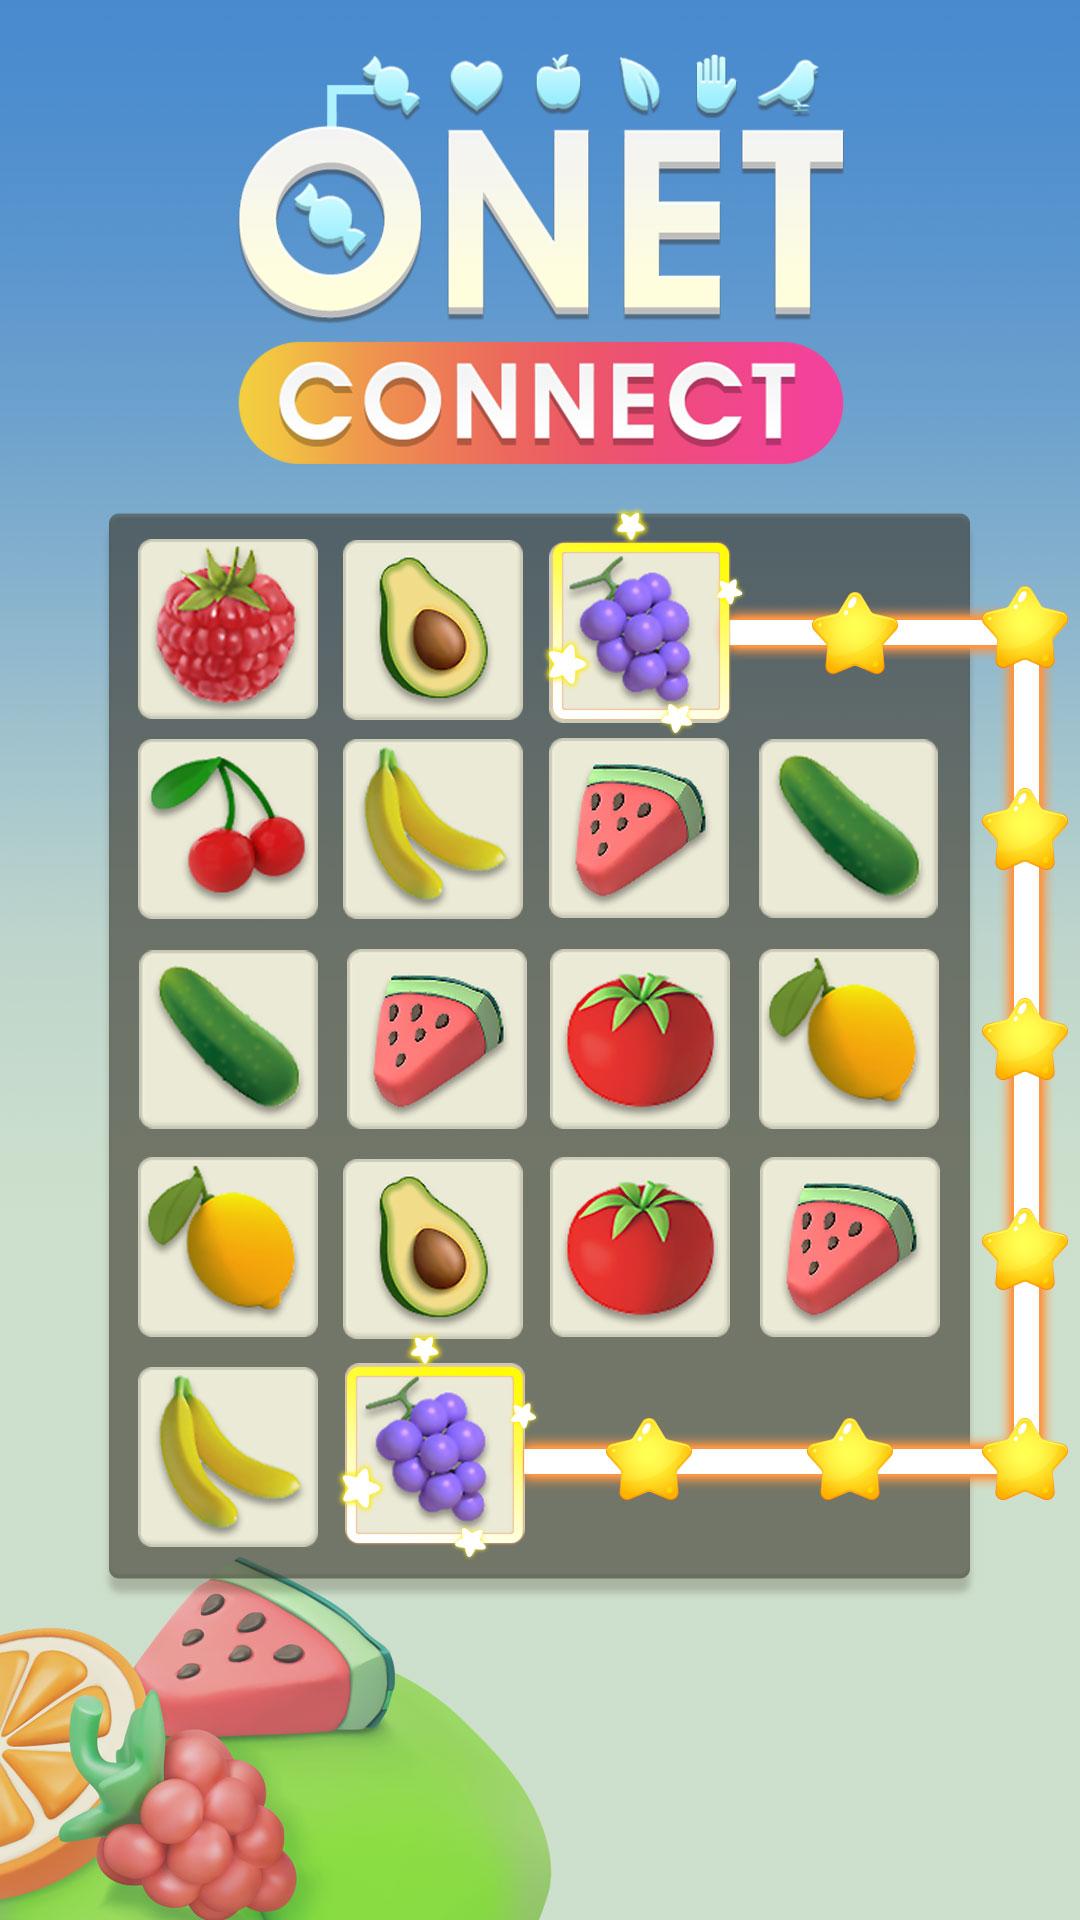 Onet Connect Free Tile Match Puzzle Game 1.1.0 Screenshot 9